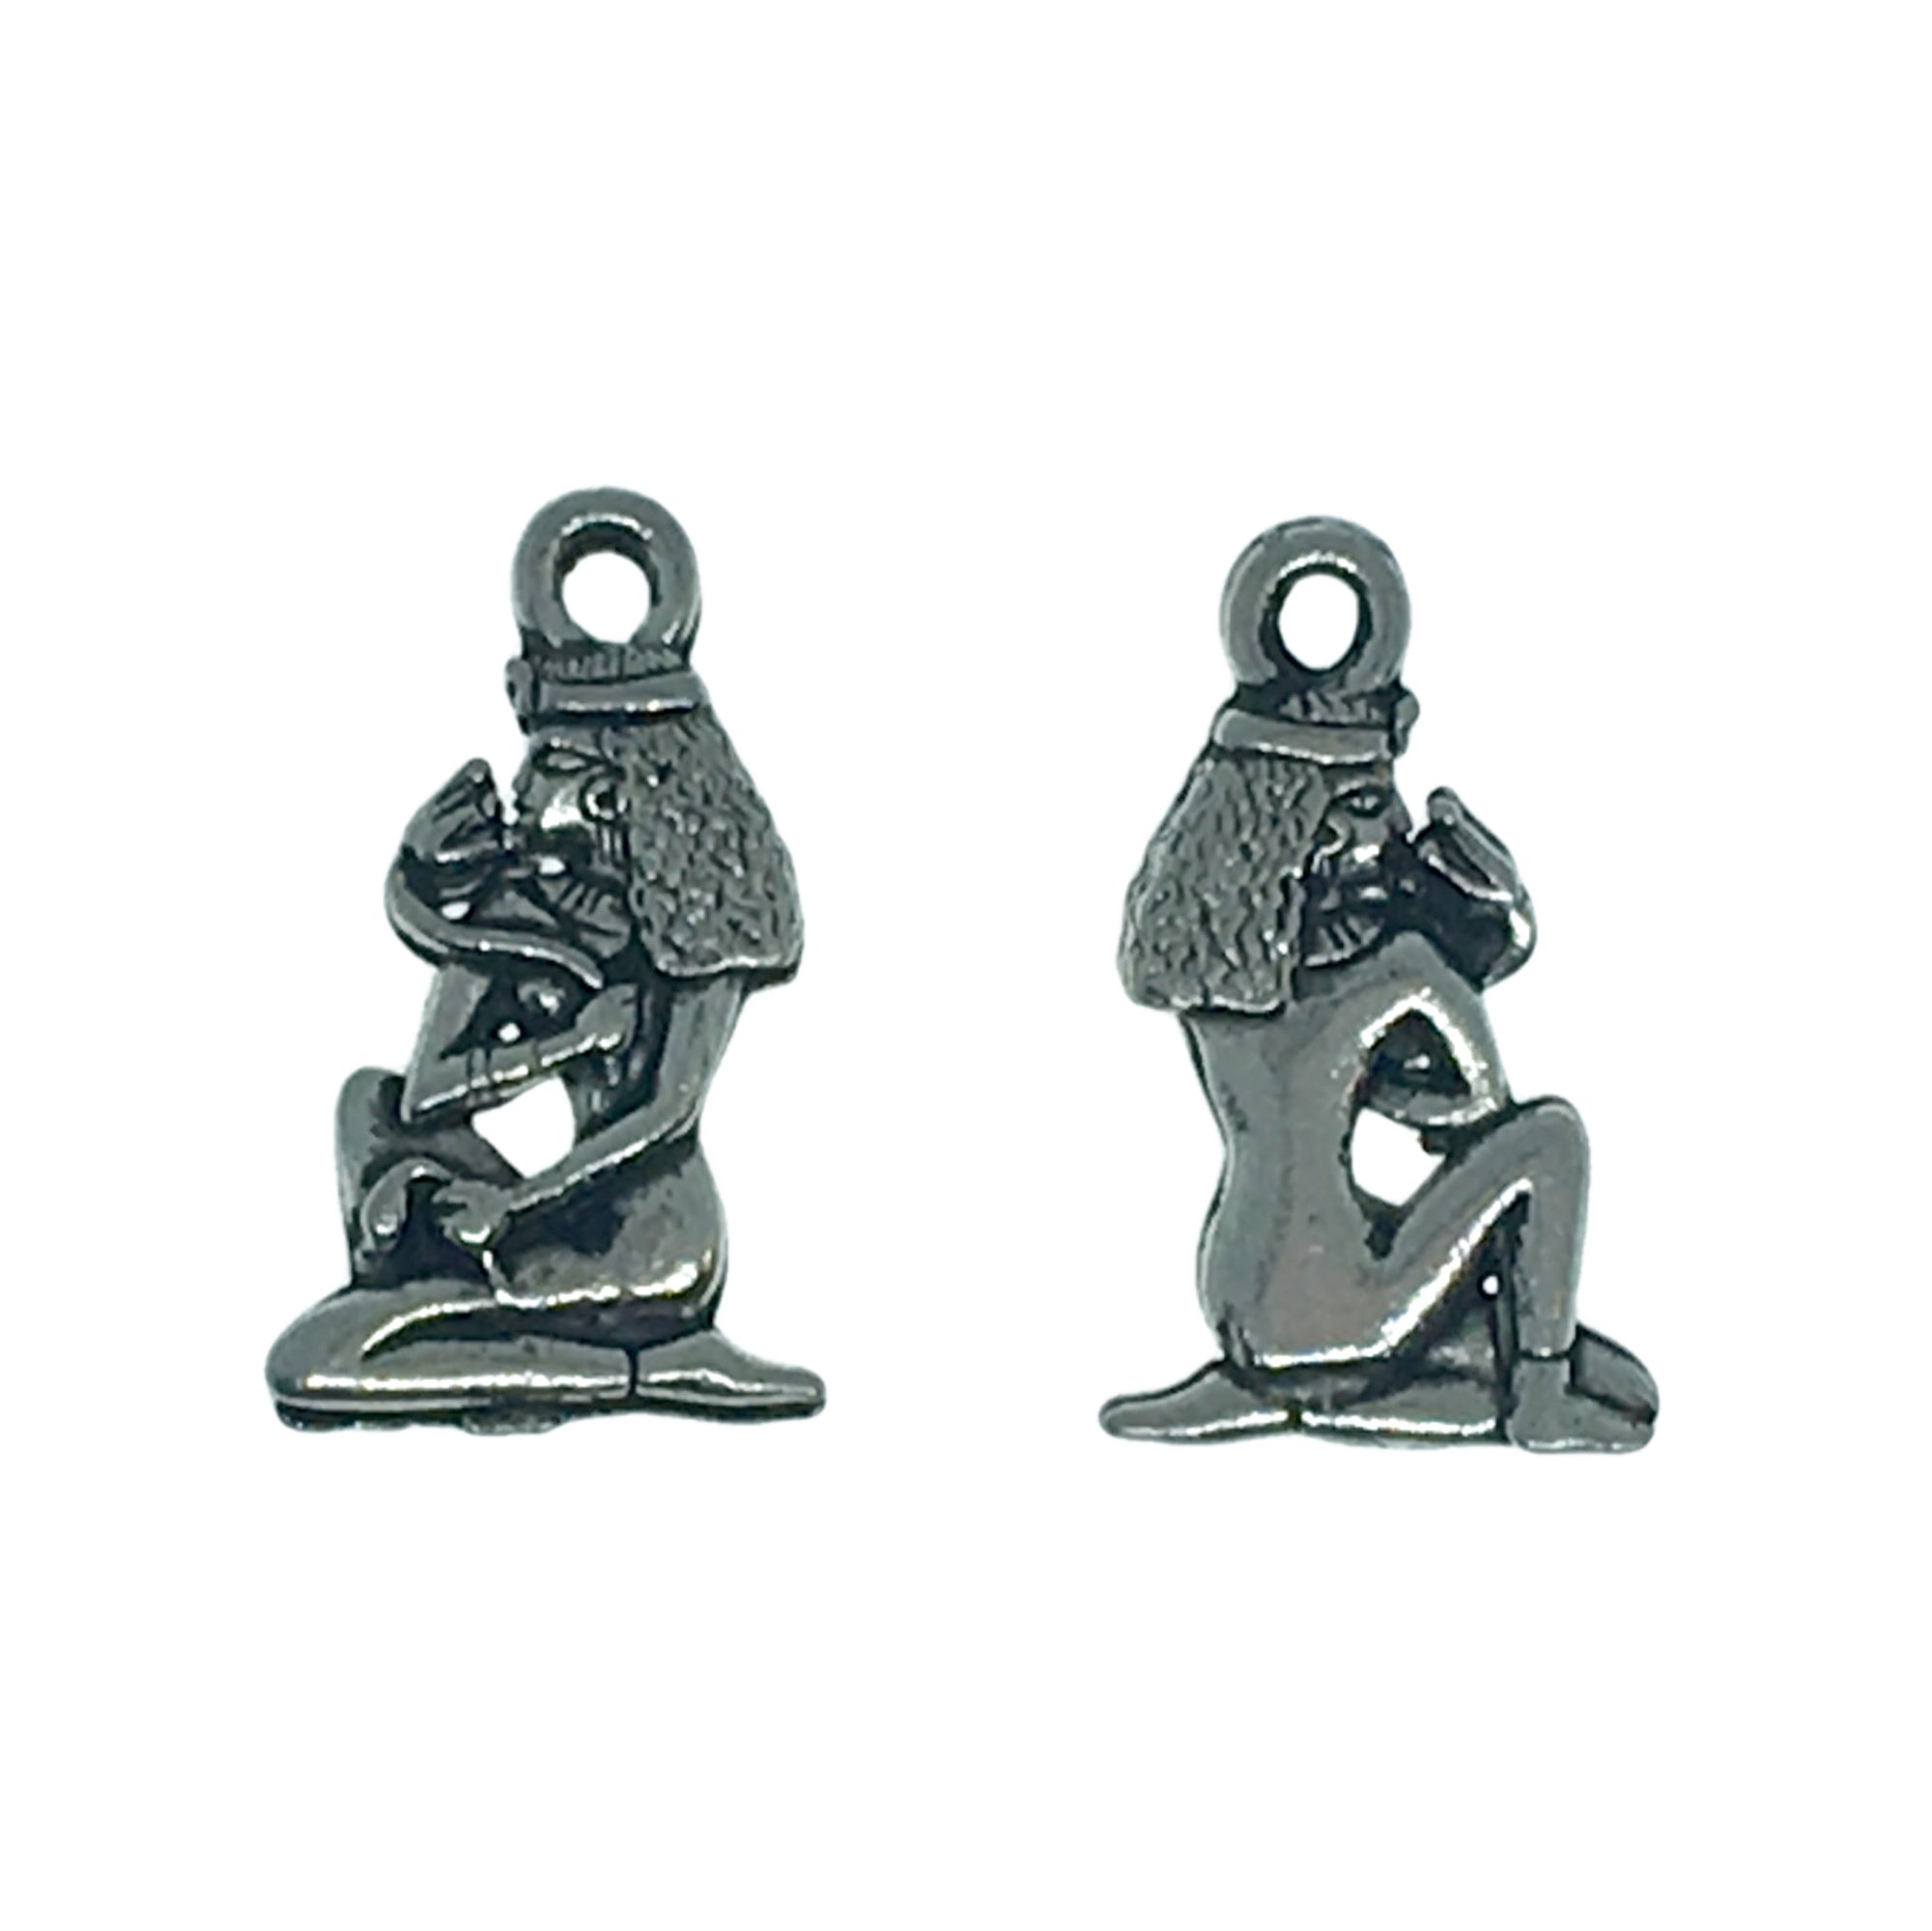 Cleopatra with Lotus Charms - Qty of 5 - Lead Free Plated Pewter Silver - American Made